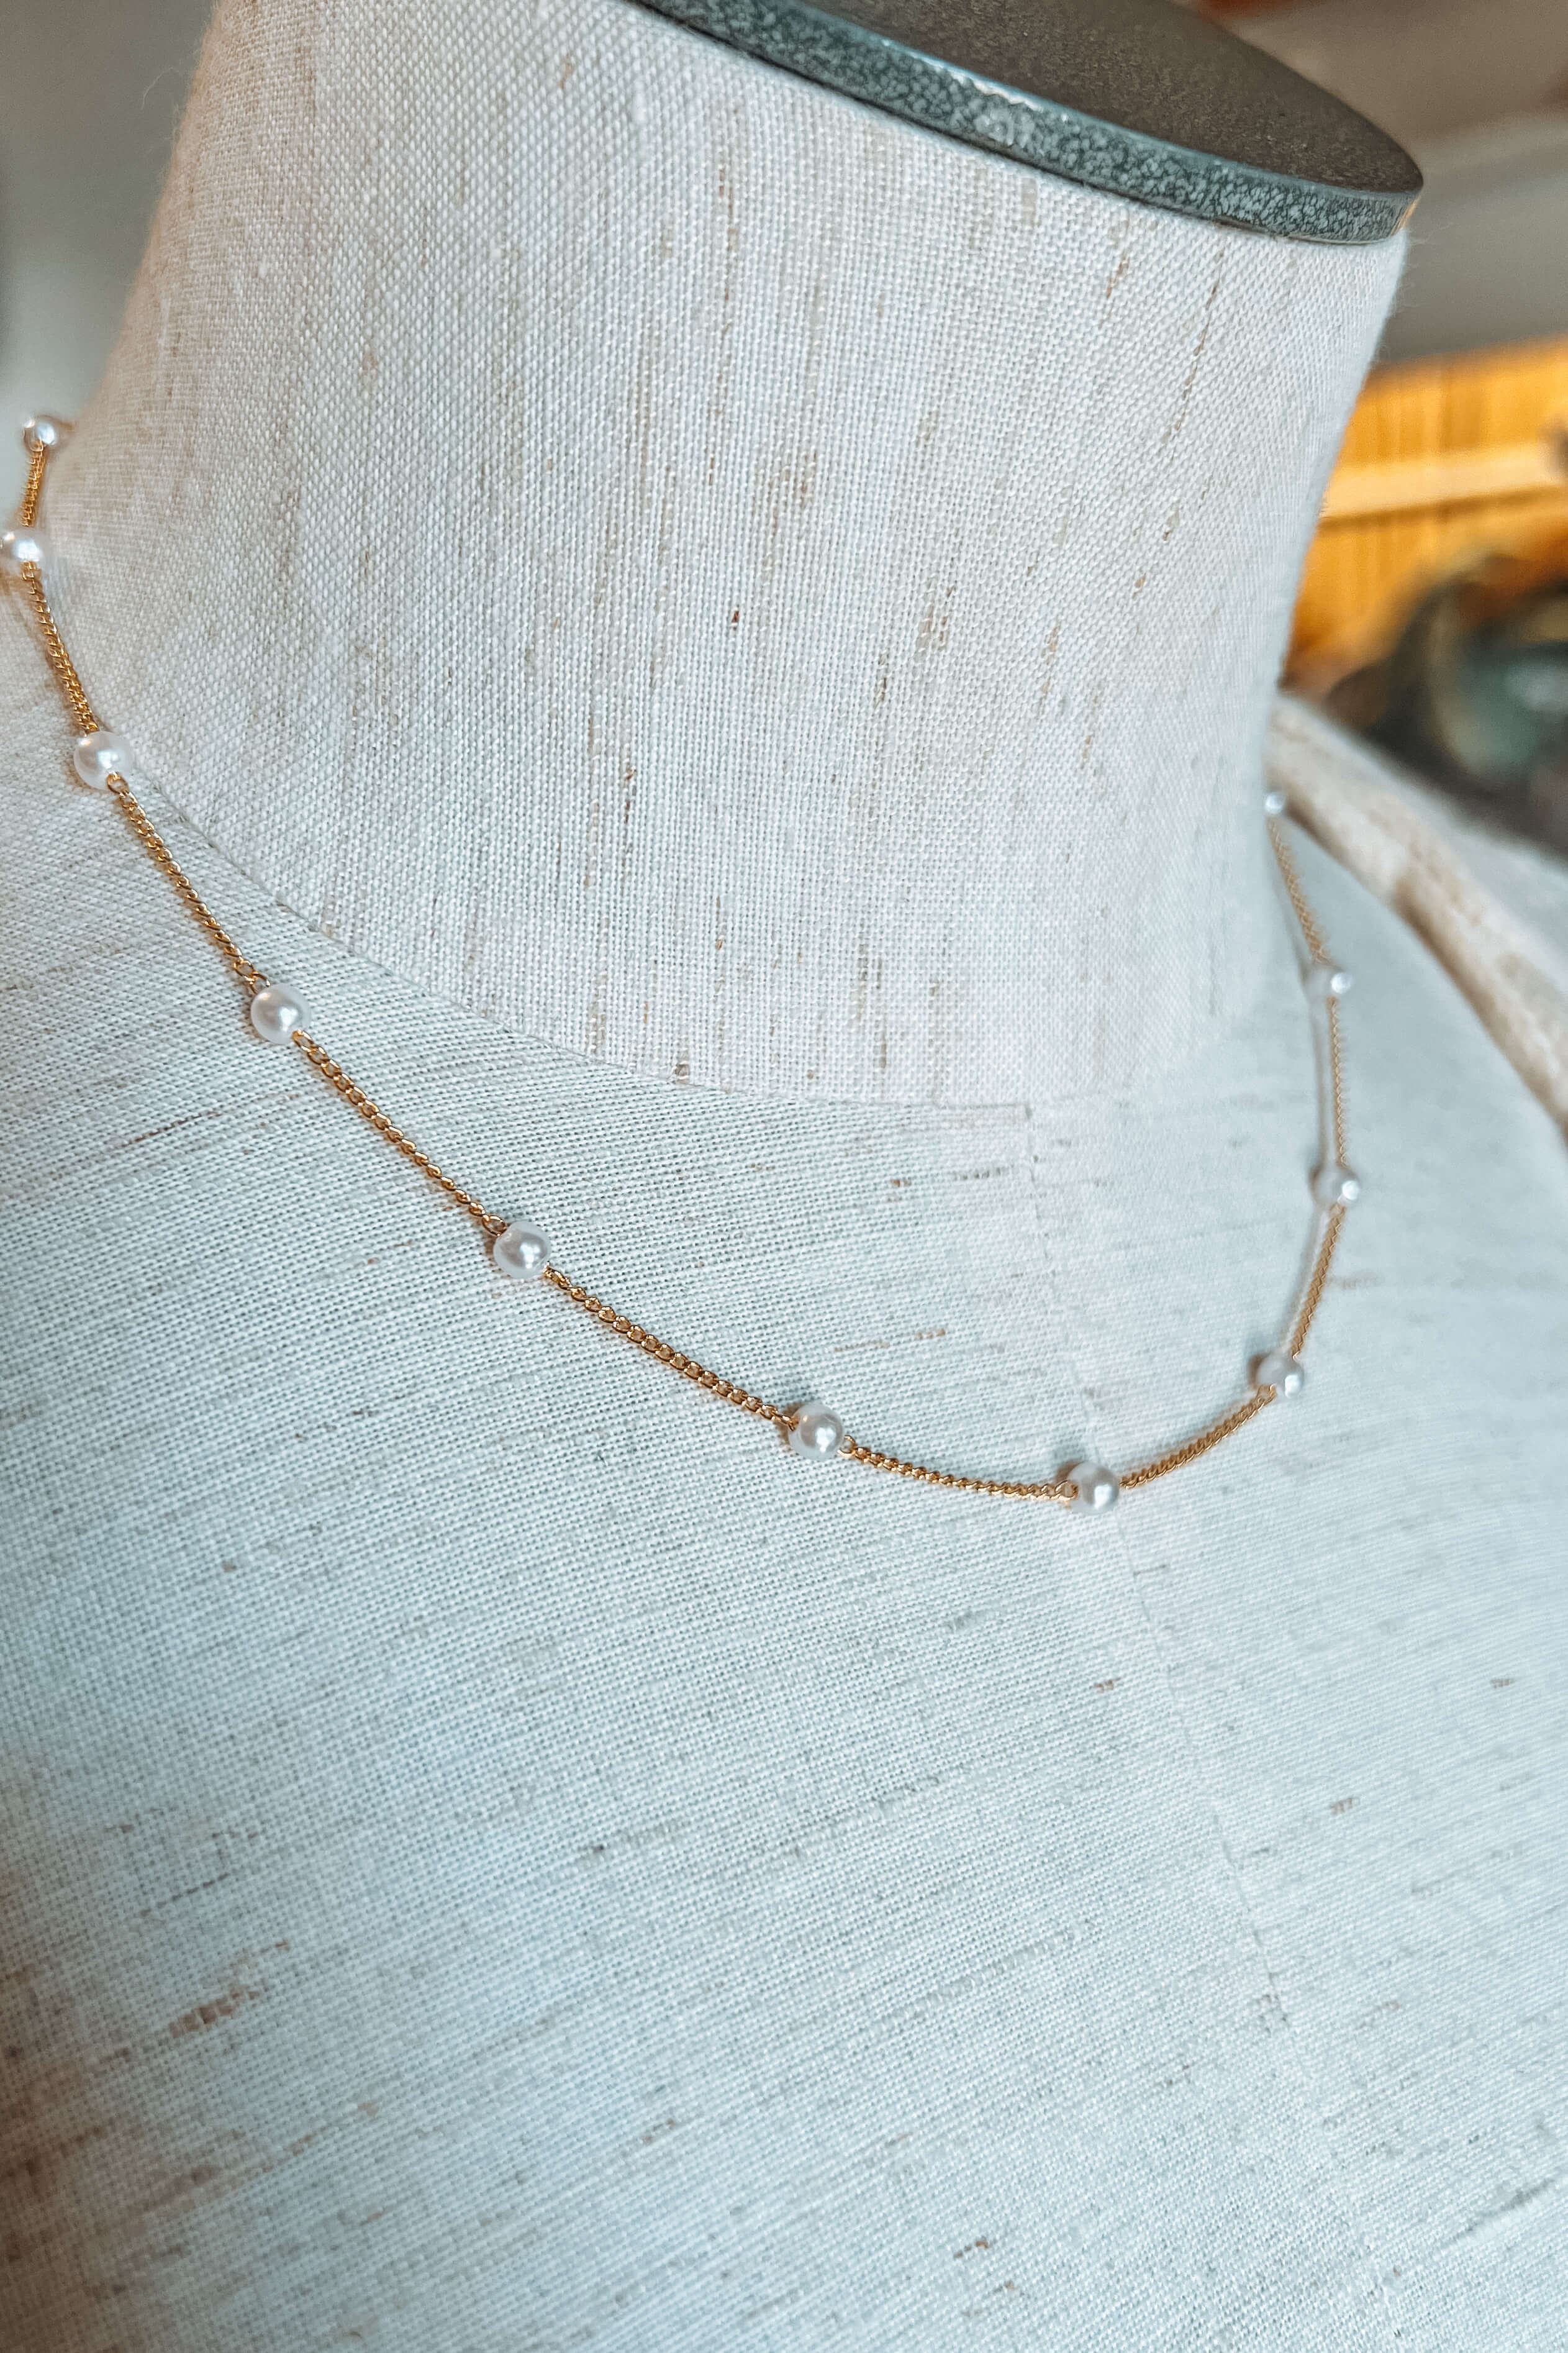 Dainty Pearl Bead Chain Necklace - Necklace - The Green Brick Boutique